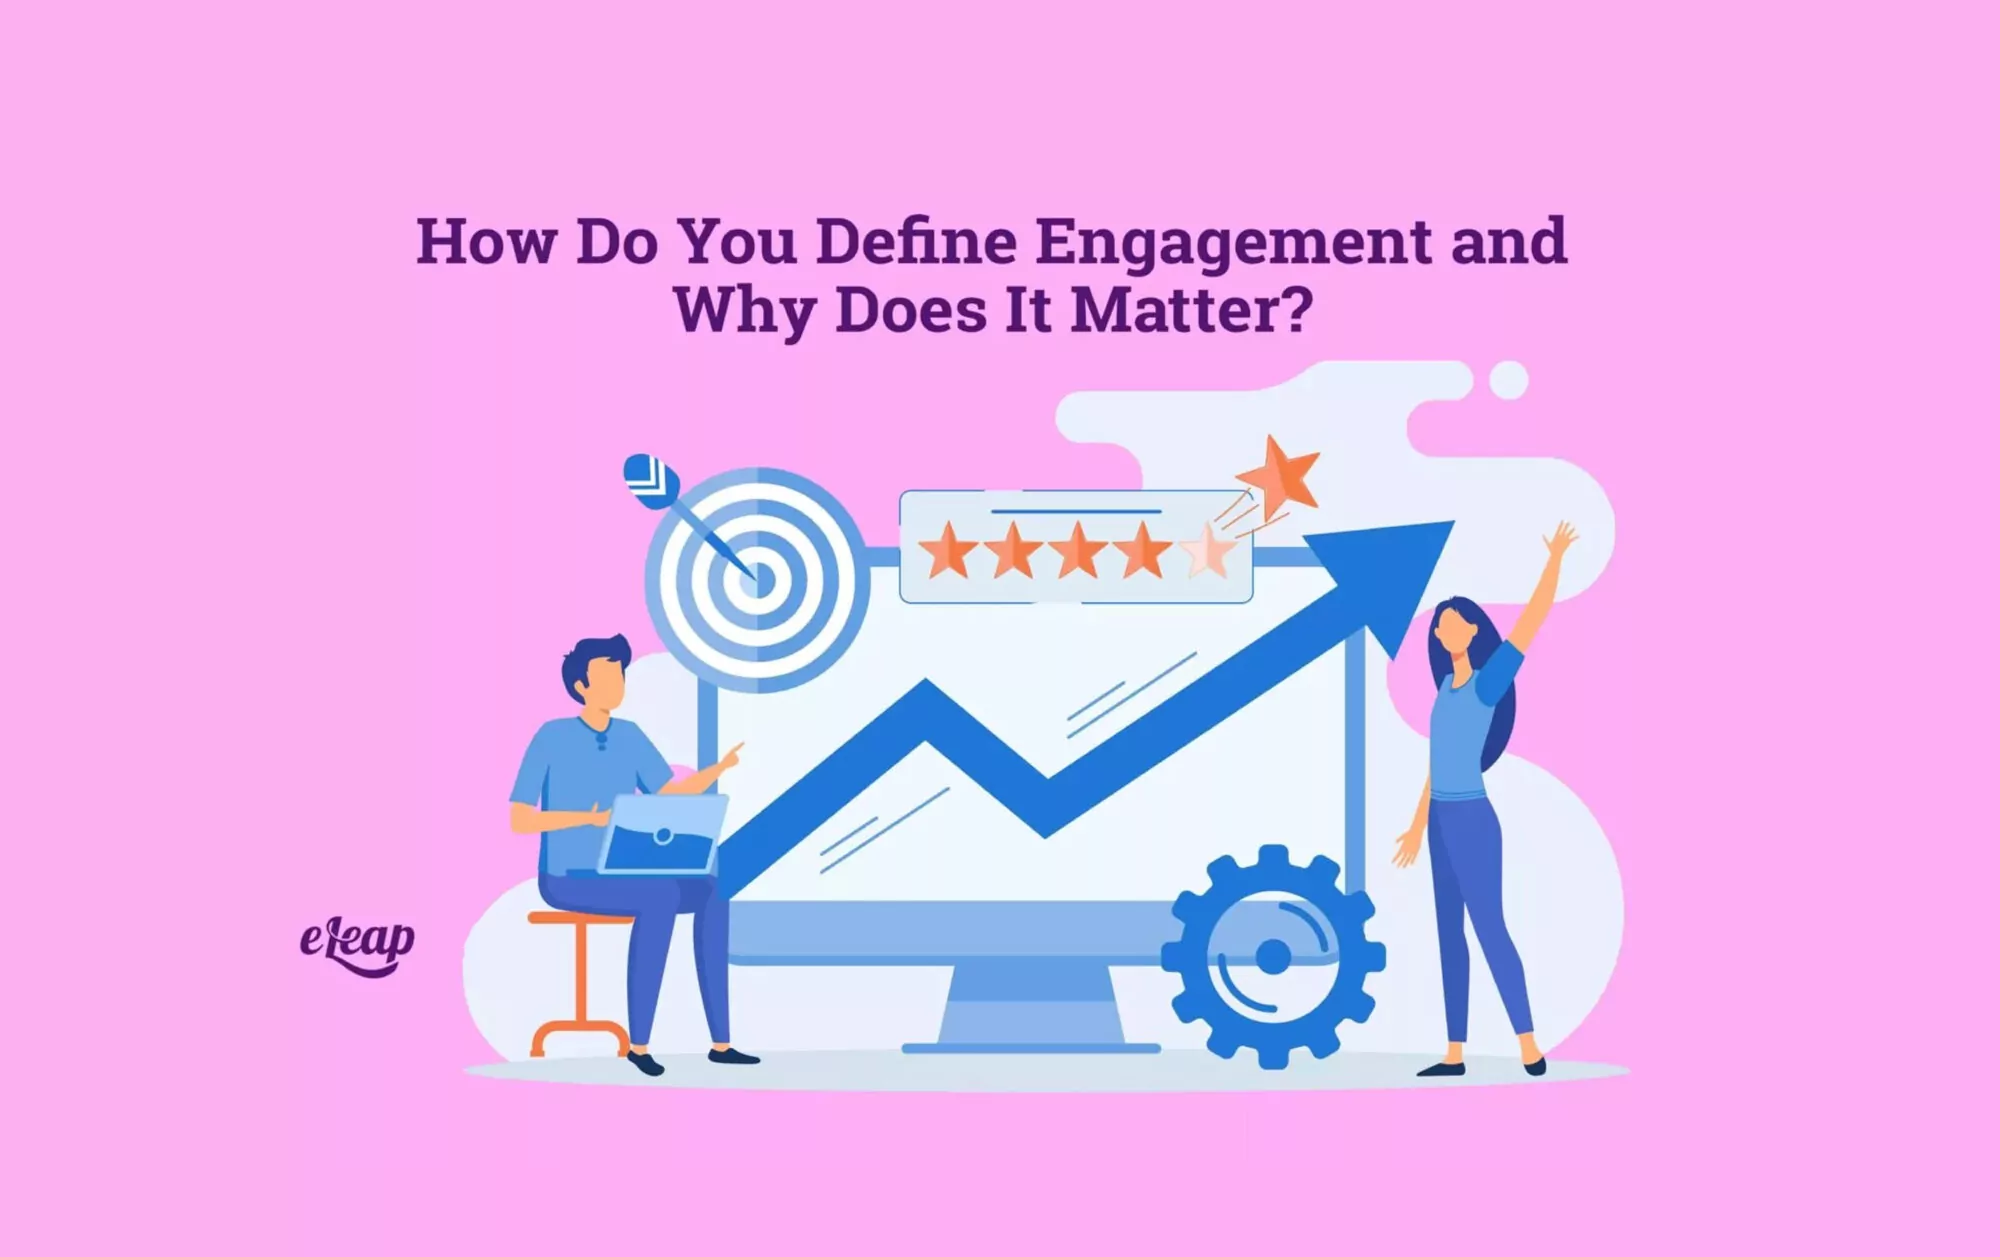 How Do You Define Engagement and Why Does It Matter